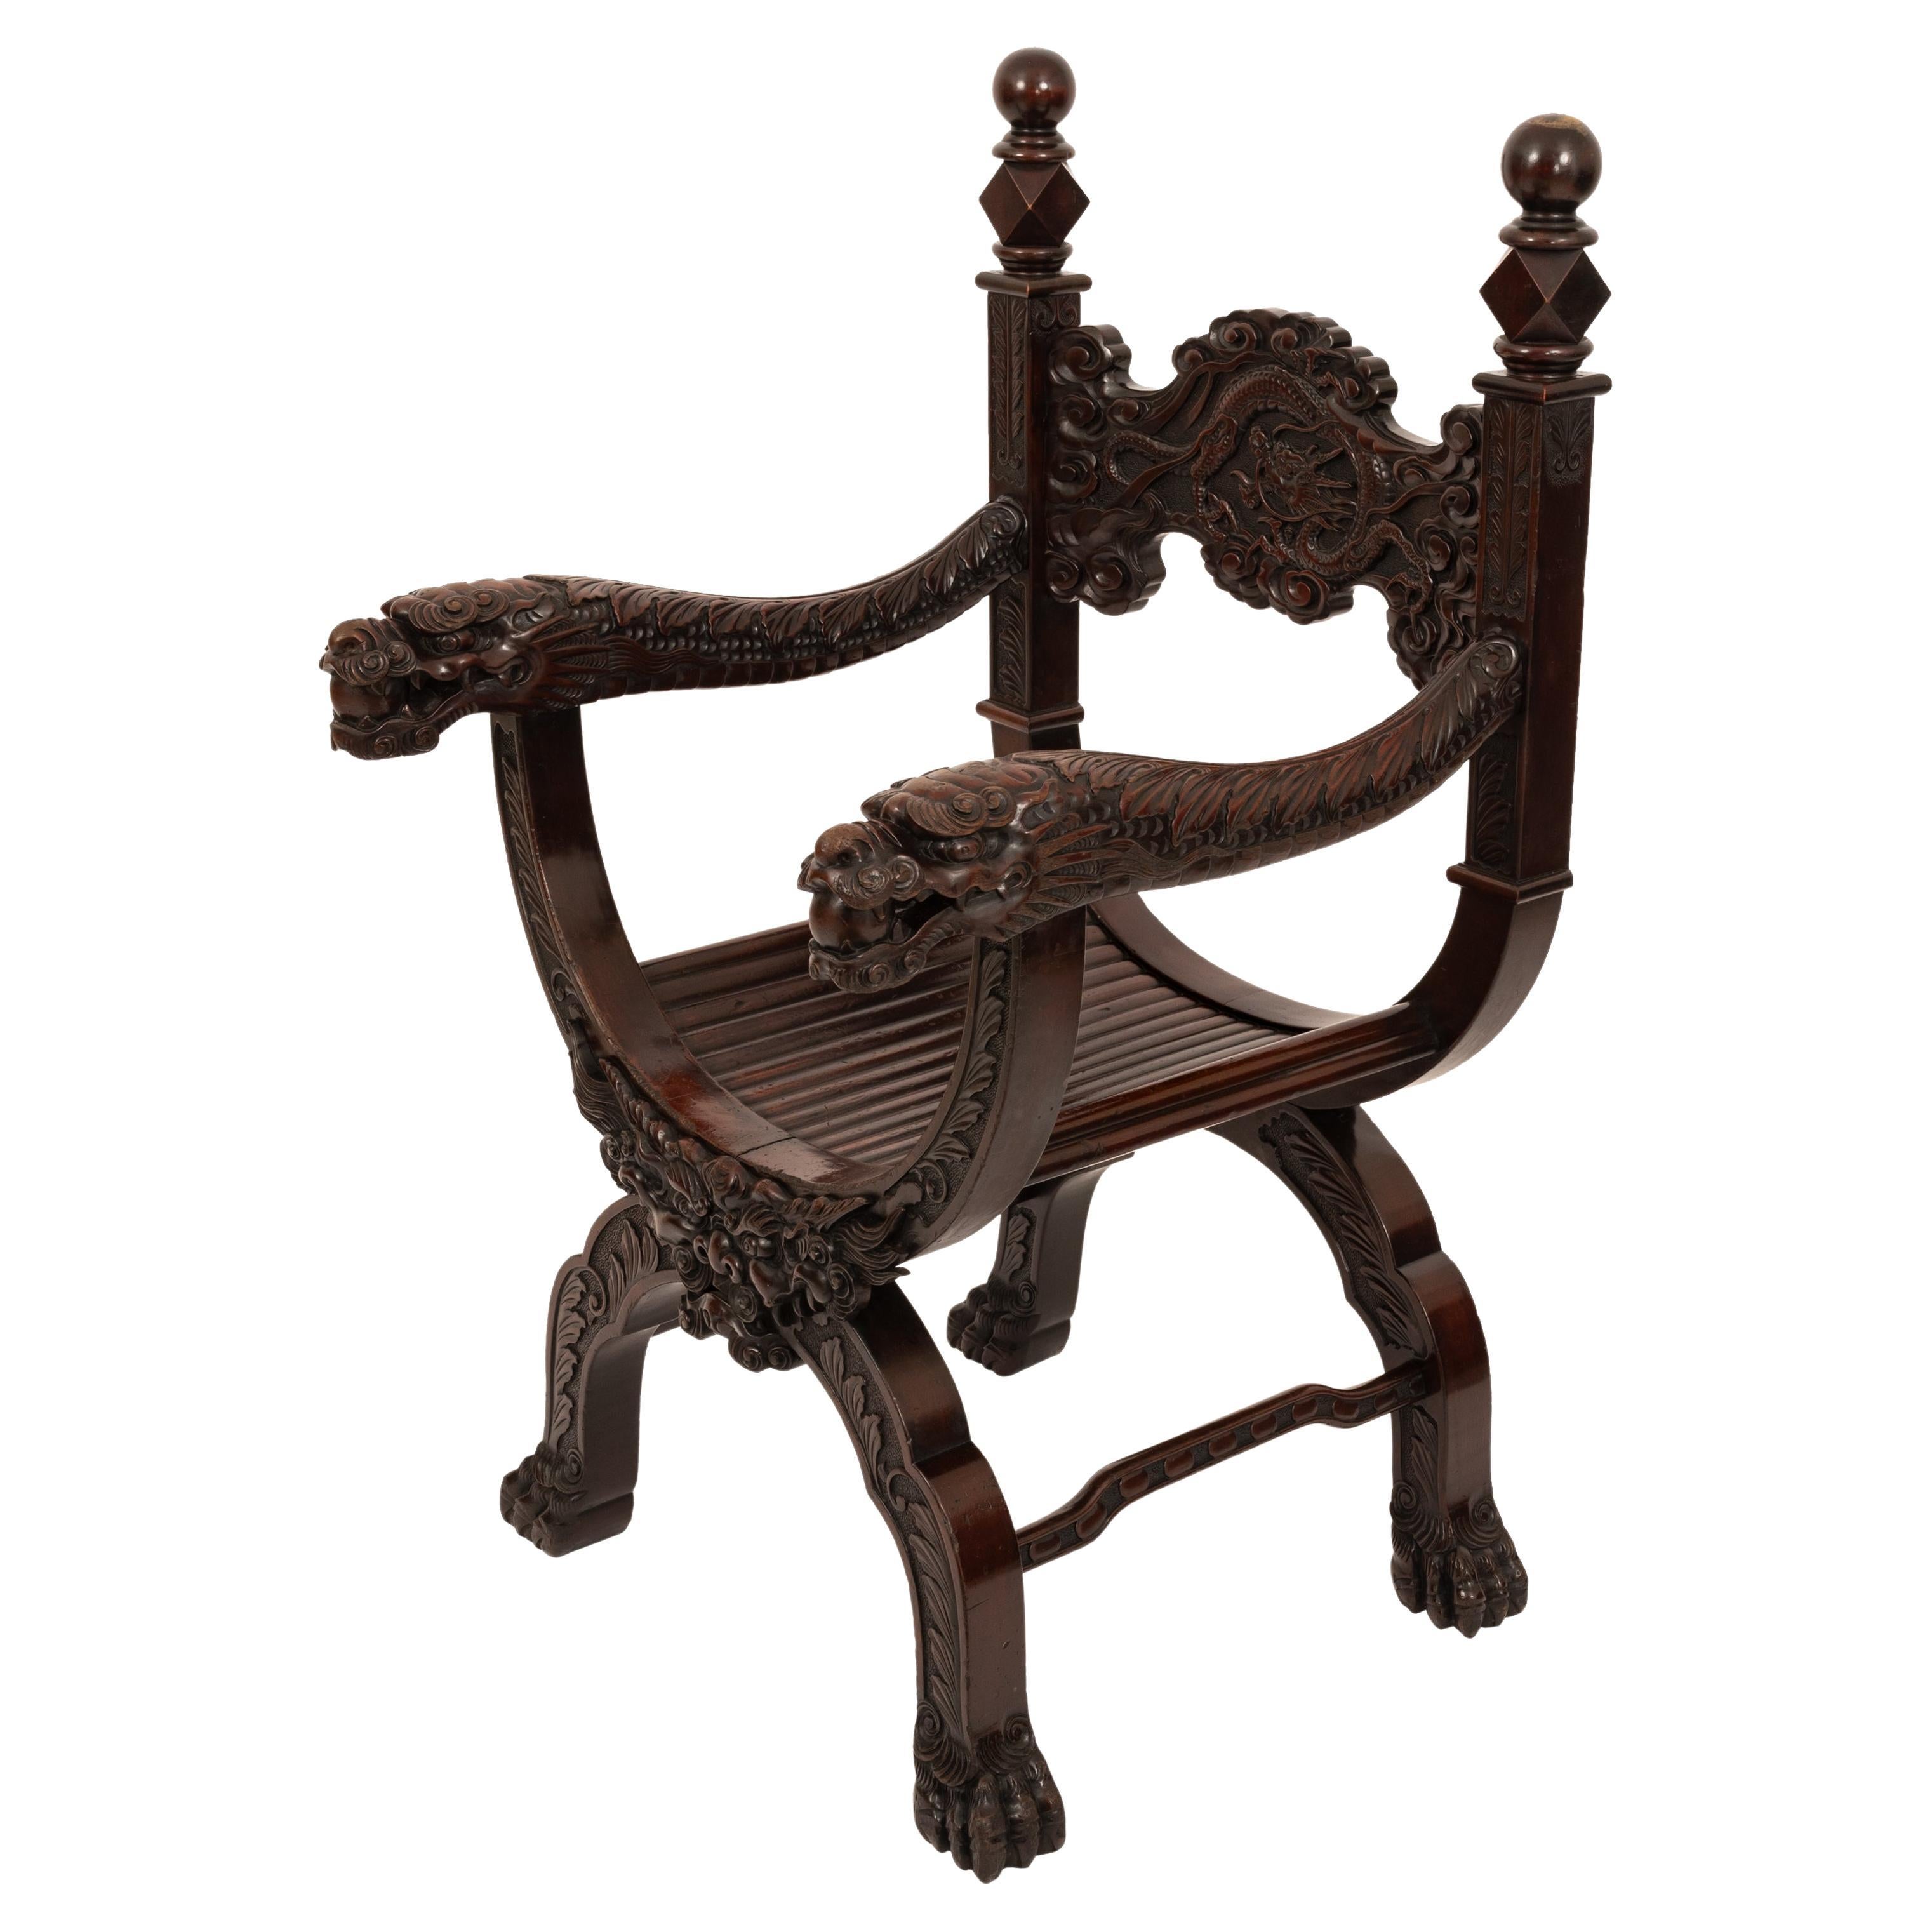 Antique American Robert Mitchell Carved Chinoiserie Savonarola Dragon Chair 1900 For Sale